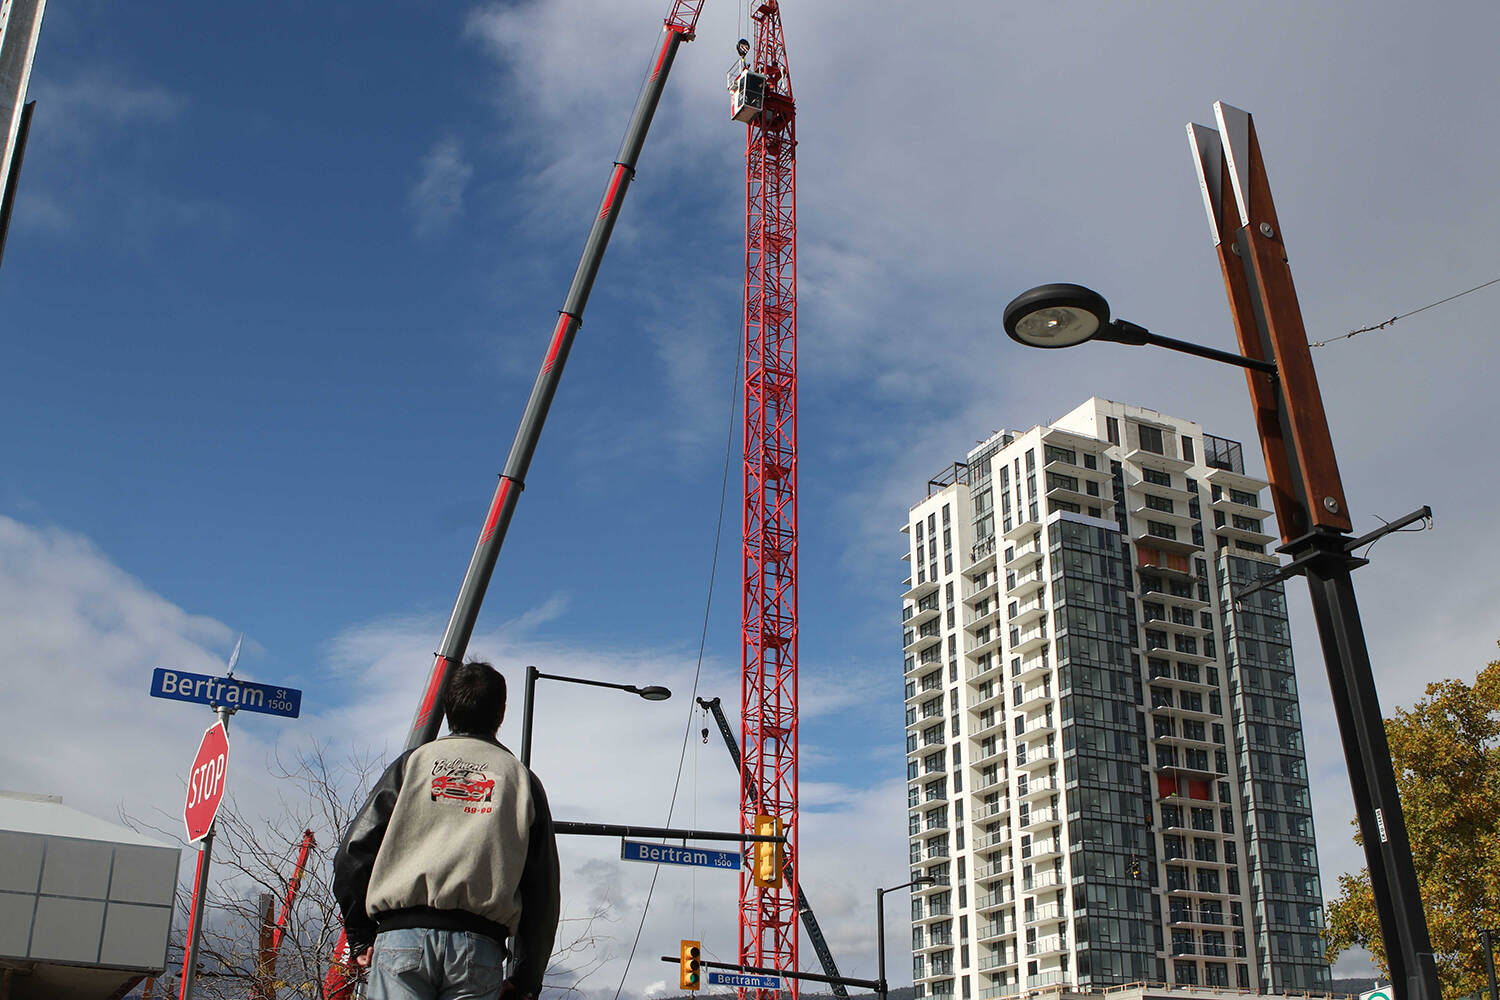 A man watches as a new tower crane is assembled in downtown Kelowna on Oct 26, 2021. (Aaron Hemens/Capital News)